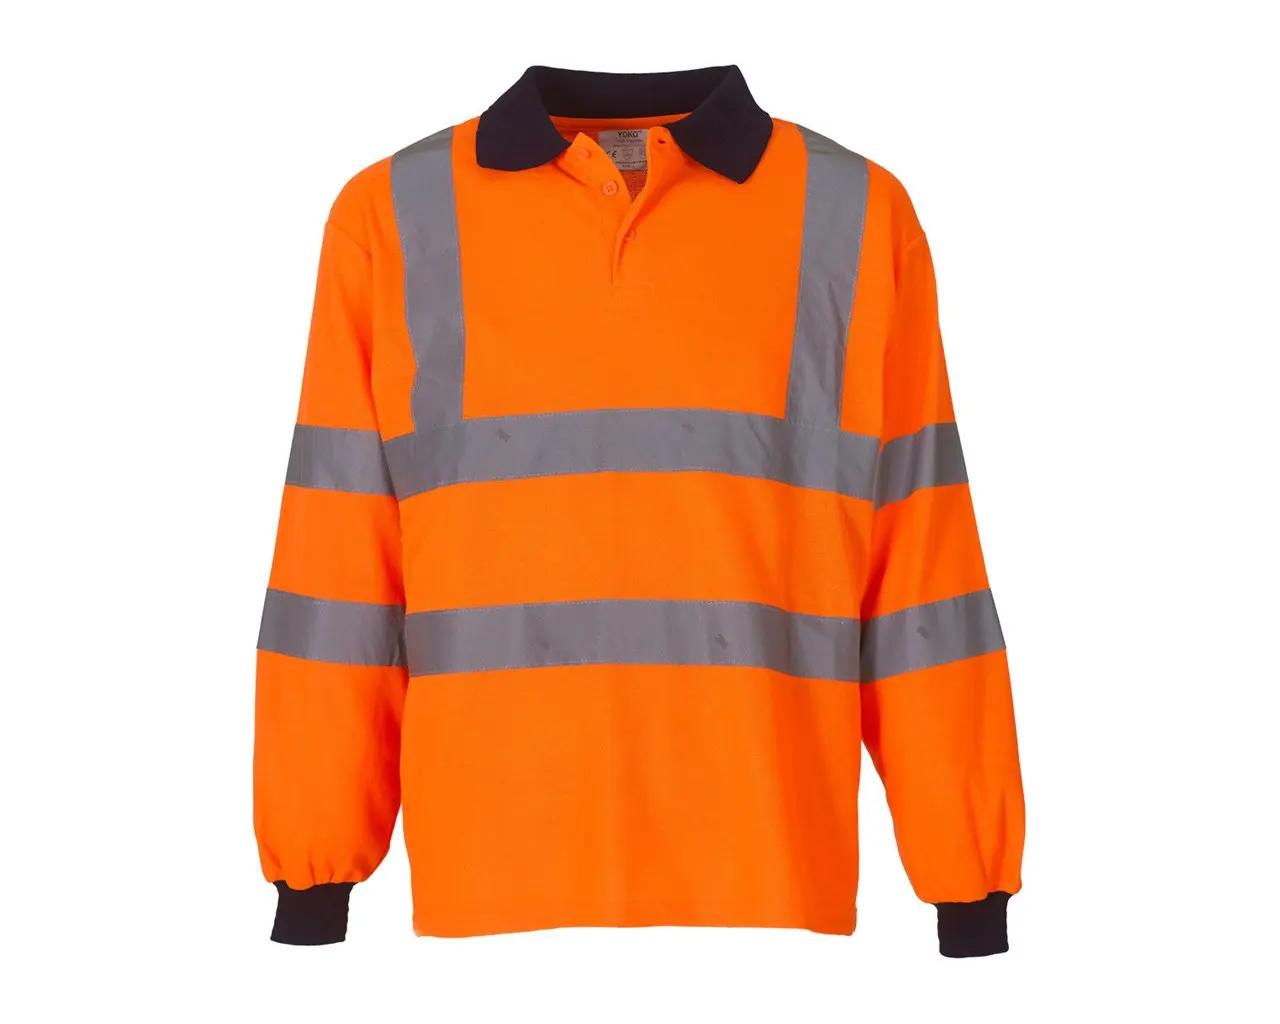 Hot Sell Hi Vis Work Traffic Reflective Safety Shirts Class 3